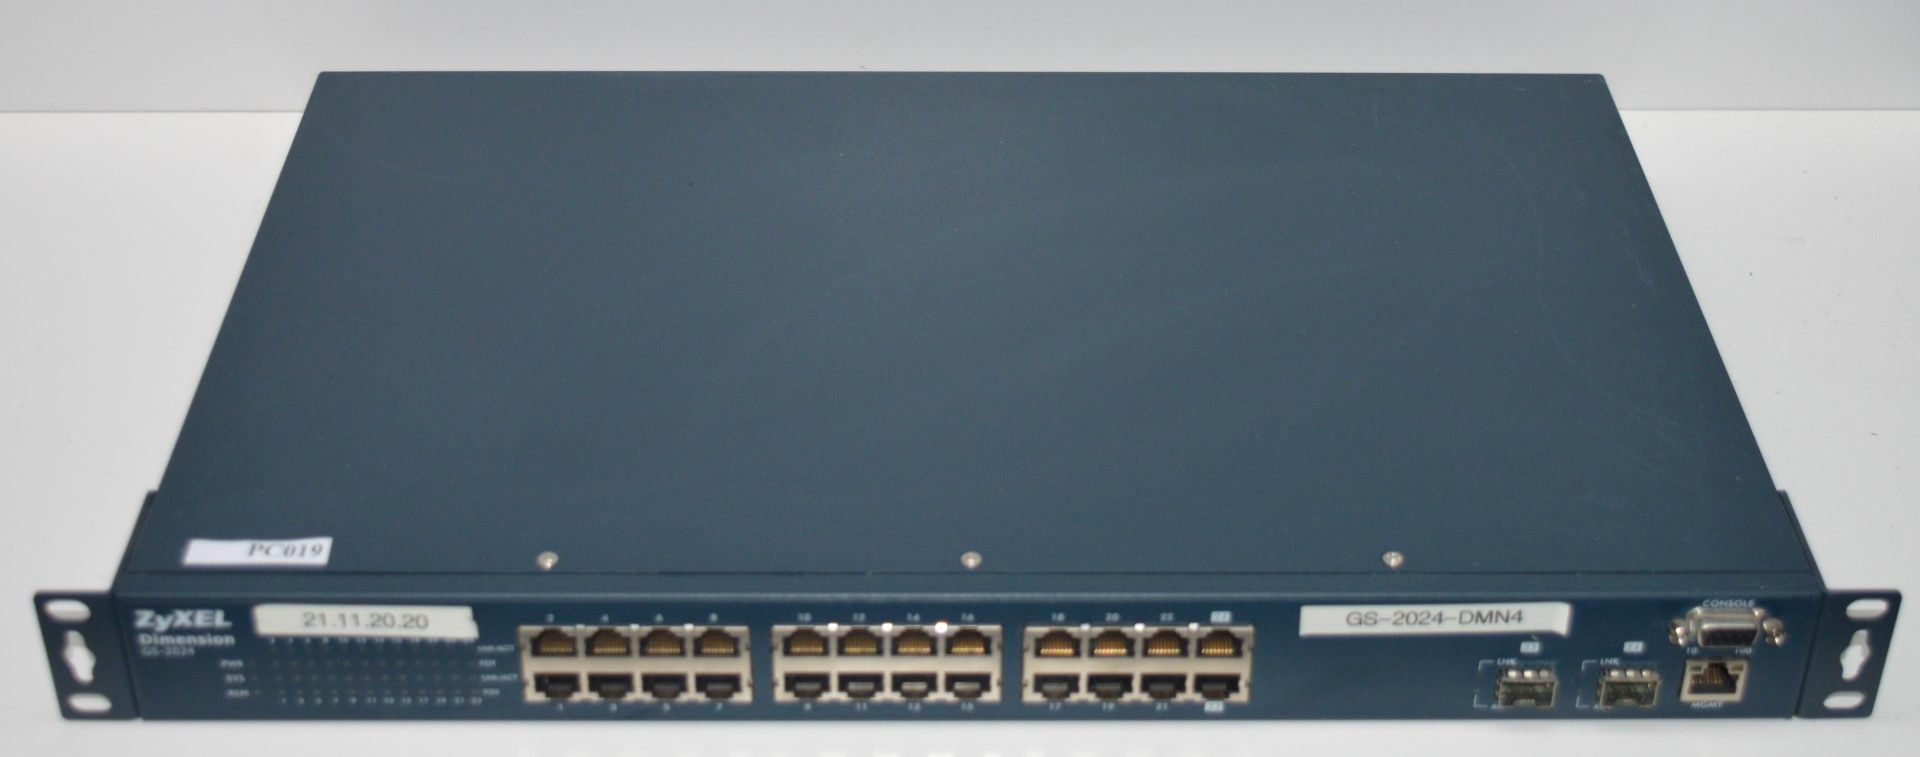 1 x Zyxel 24 Port Layer 2 Managed Gigibit Switch With Fiber Ports - Model GS-2024 - CL159 - Ref - Image 3 of 8